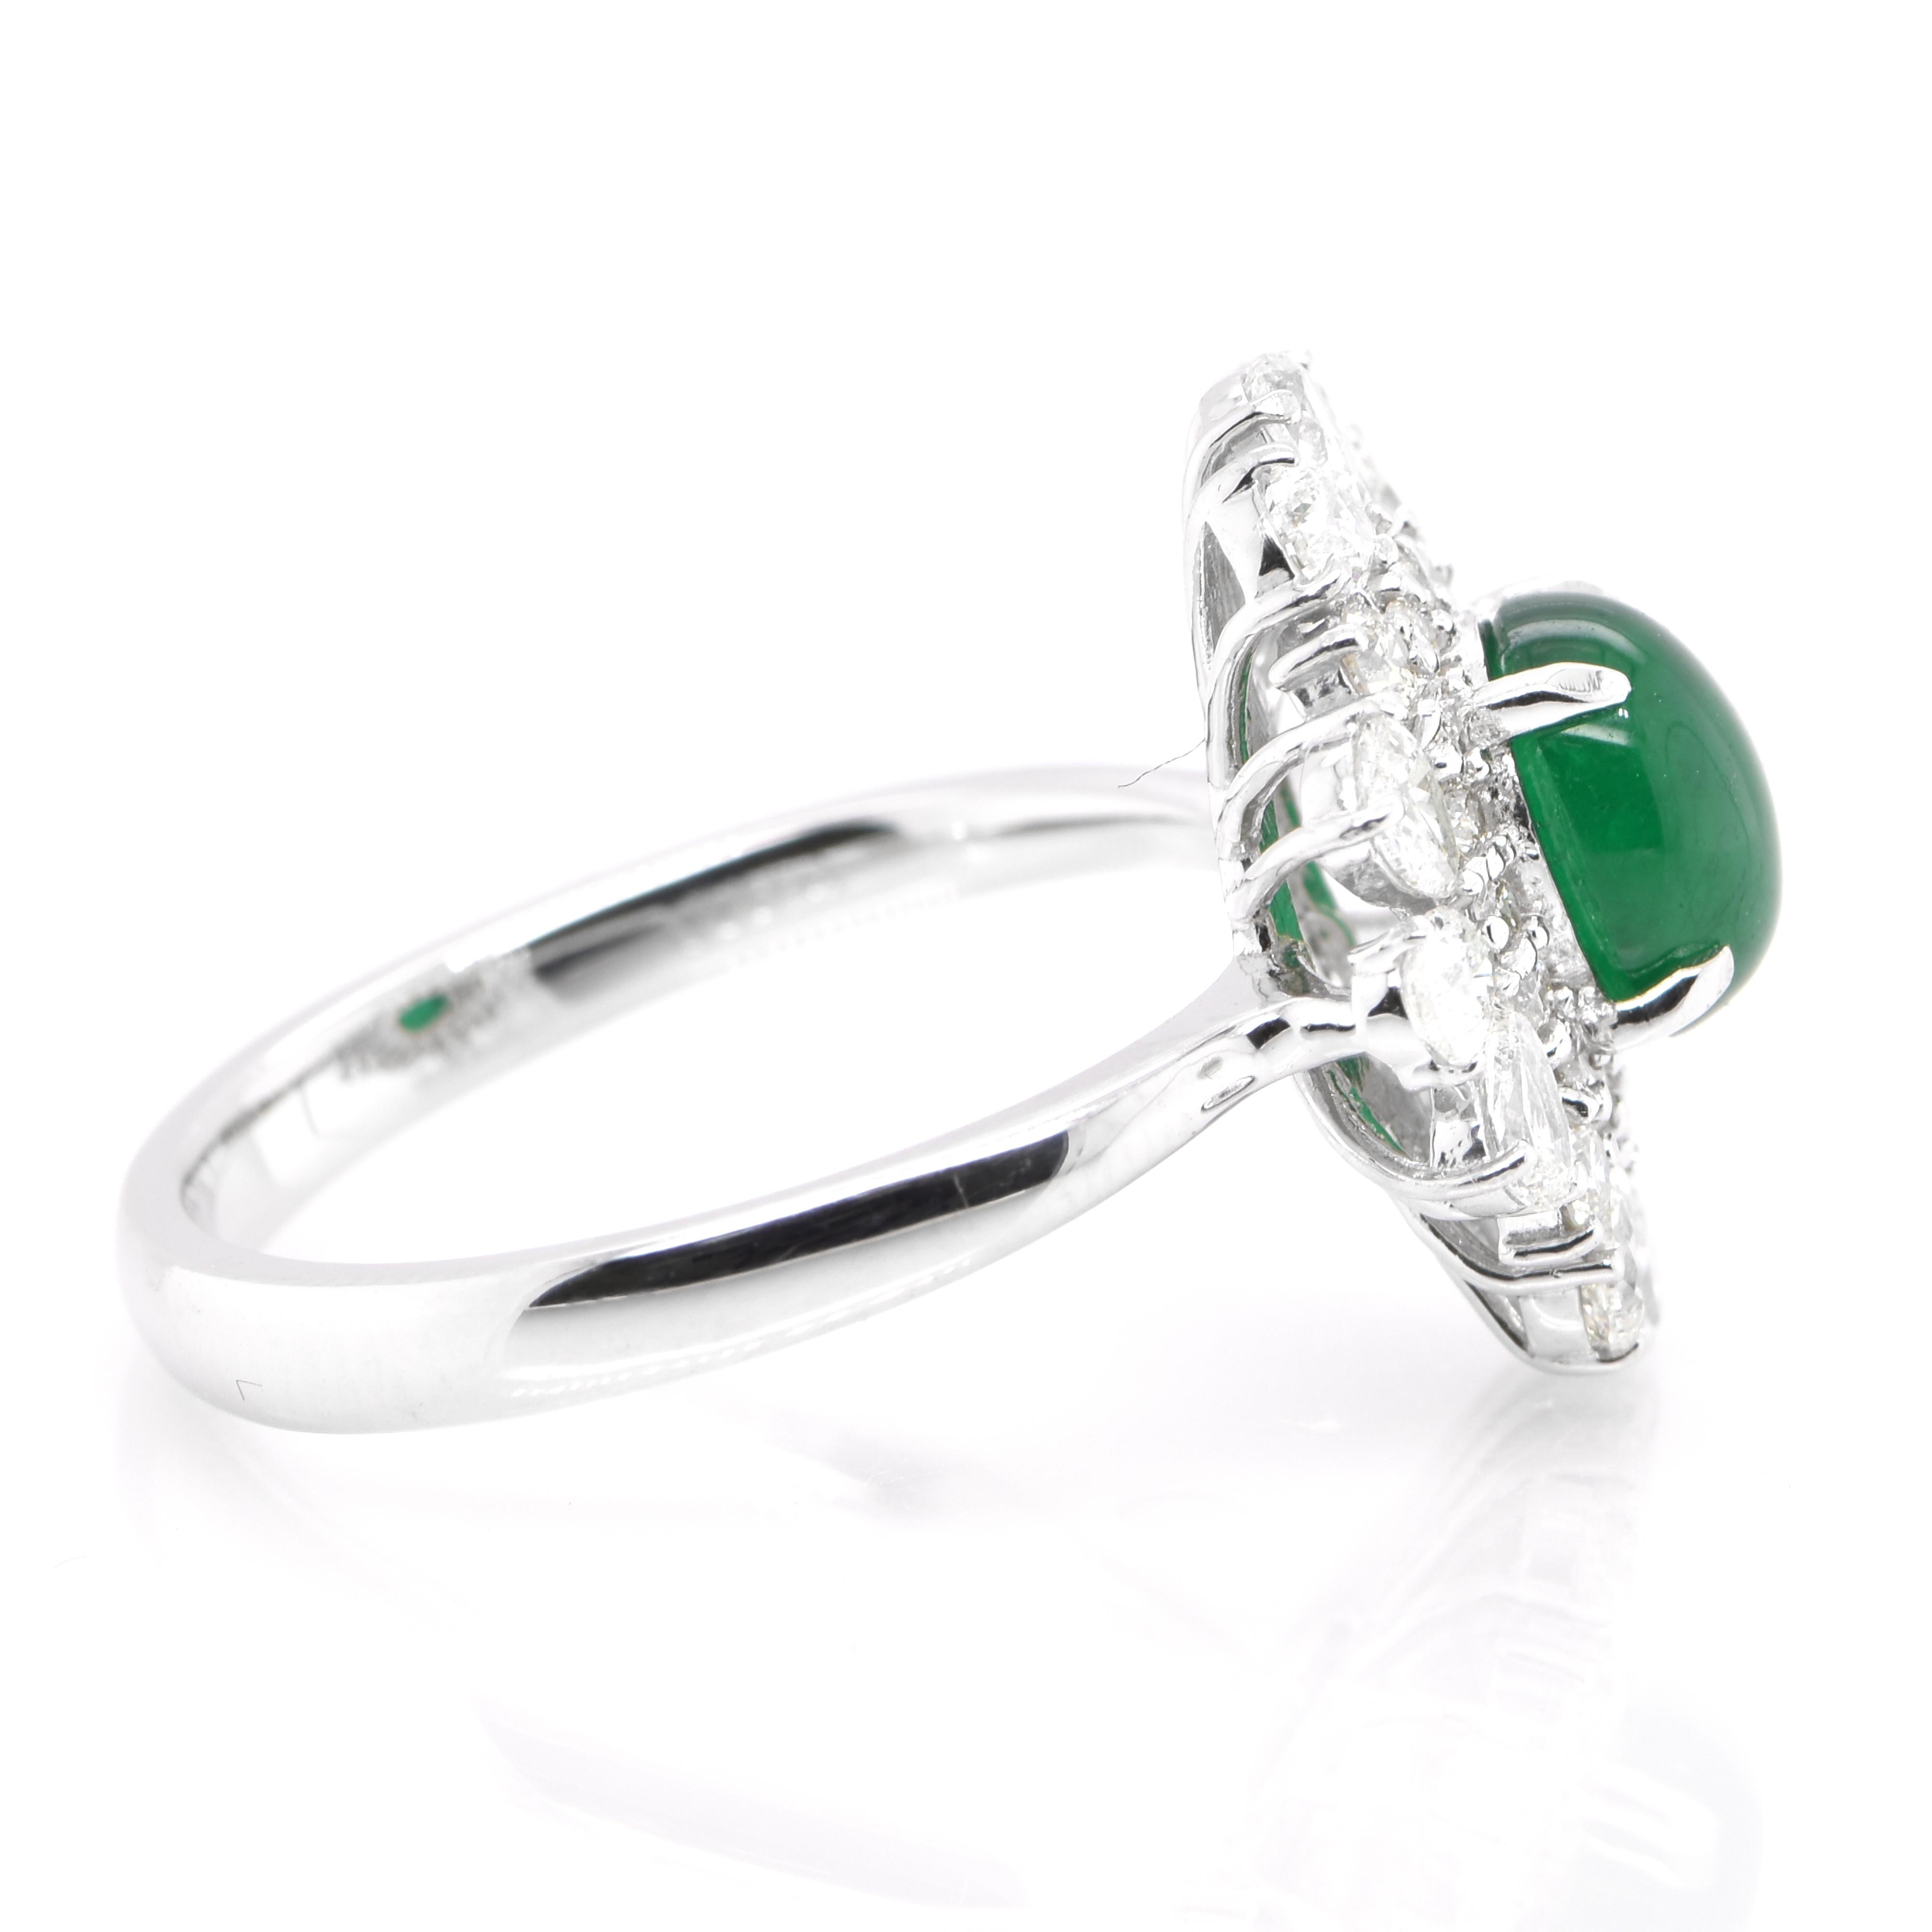 Women's 1.13 Carat Natural Emerald Cabochon and Diamond Ring Set in Platinum For Sale